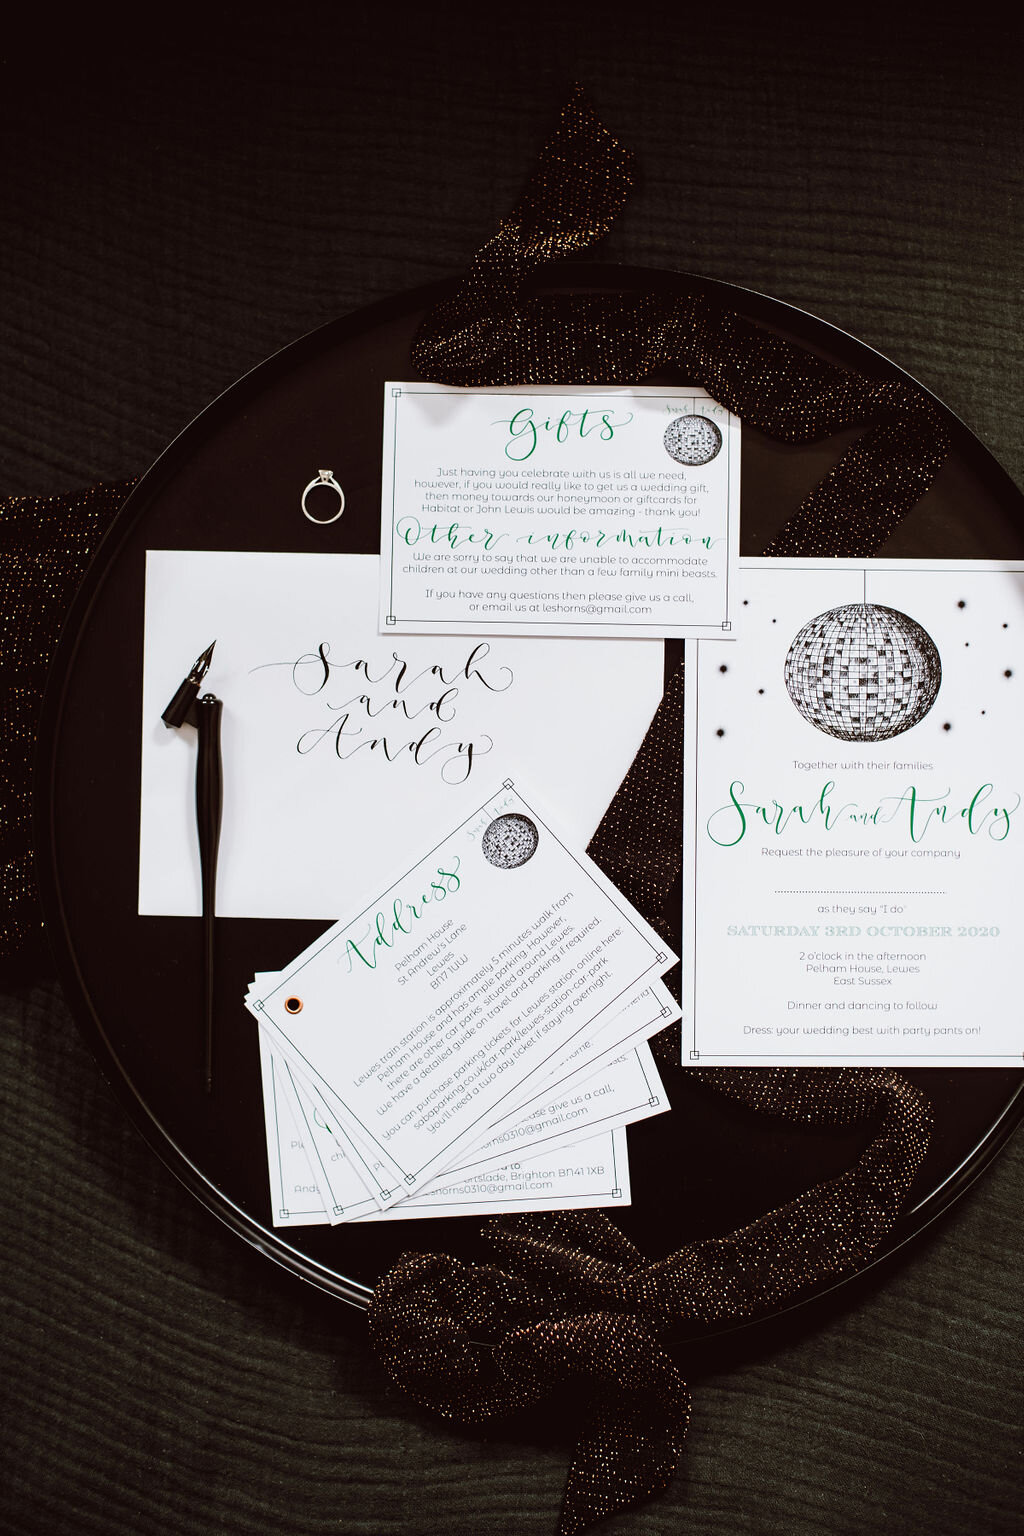 Disco ball invites -  Let's party eco friendly invitations made from recycled paper - Pelham House wedding stationery - Forest green & copper.jpg